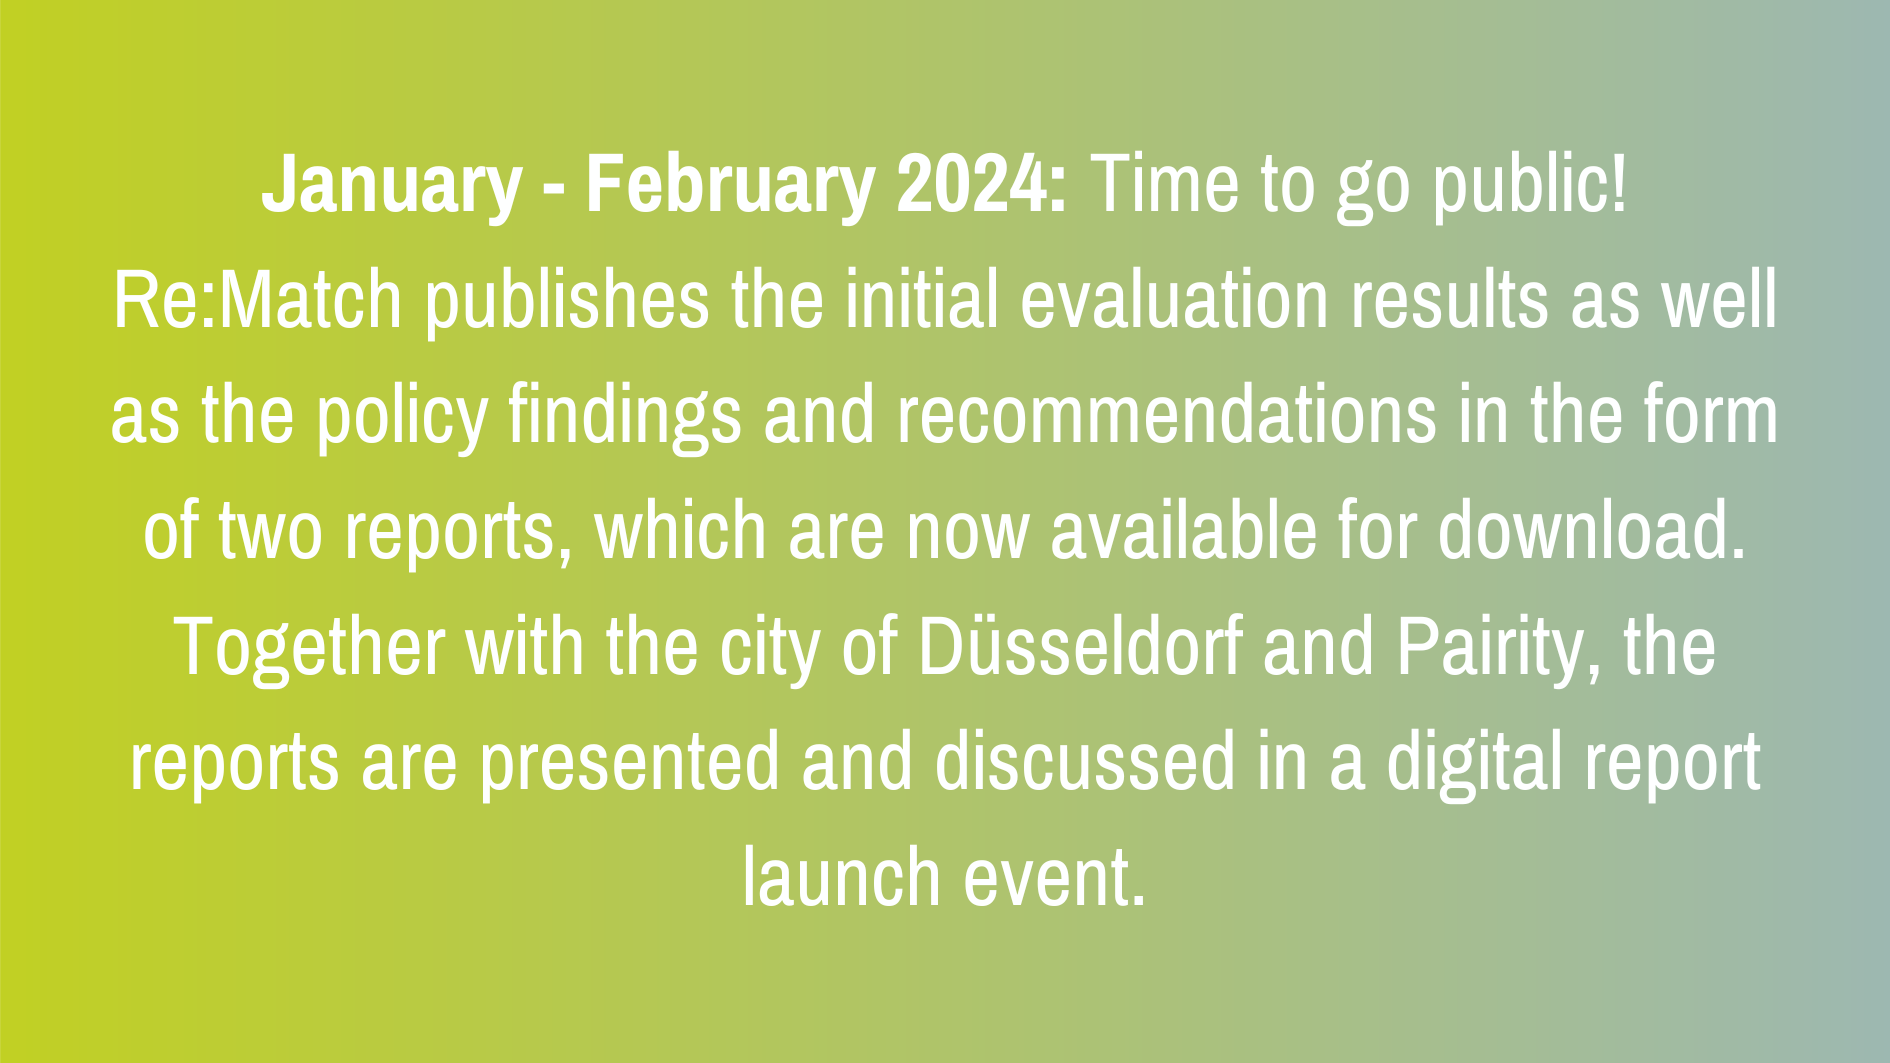 January - February 2024: Time to go public! Re:Match publishes the initial evaluation results as well as the policy findings and recommendations in the form of two reports, which are now available for download. Together with the city of Düsseldorf and Pairity, the reports are presented and discussed in a digital report launch event.